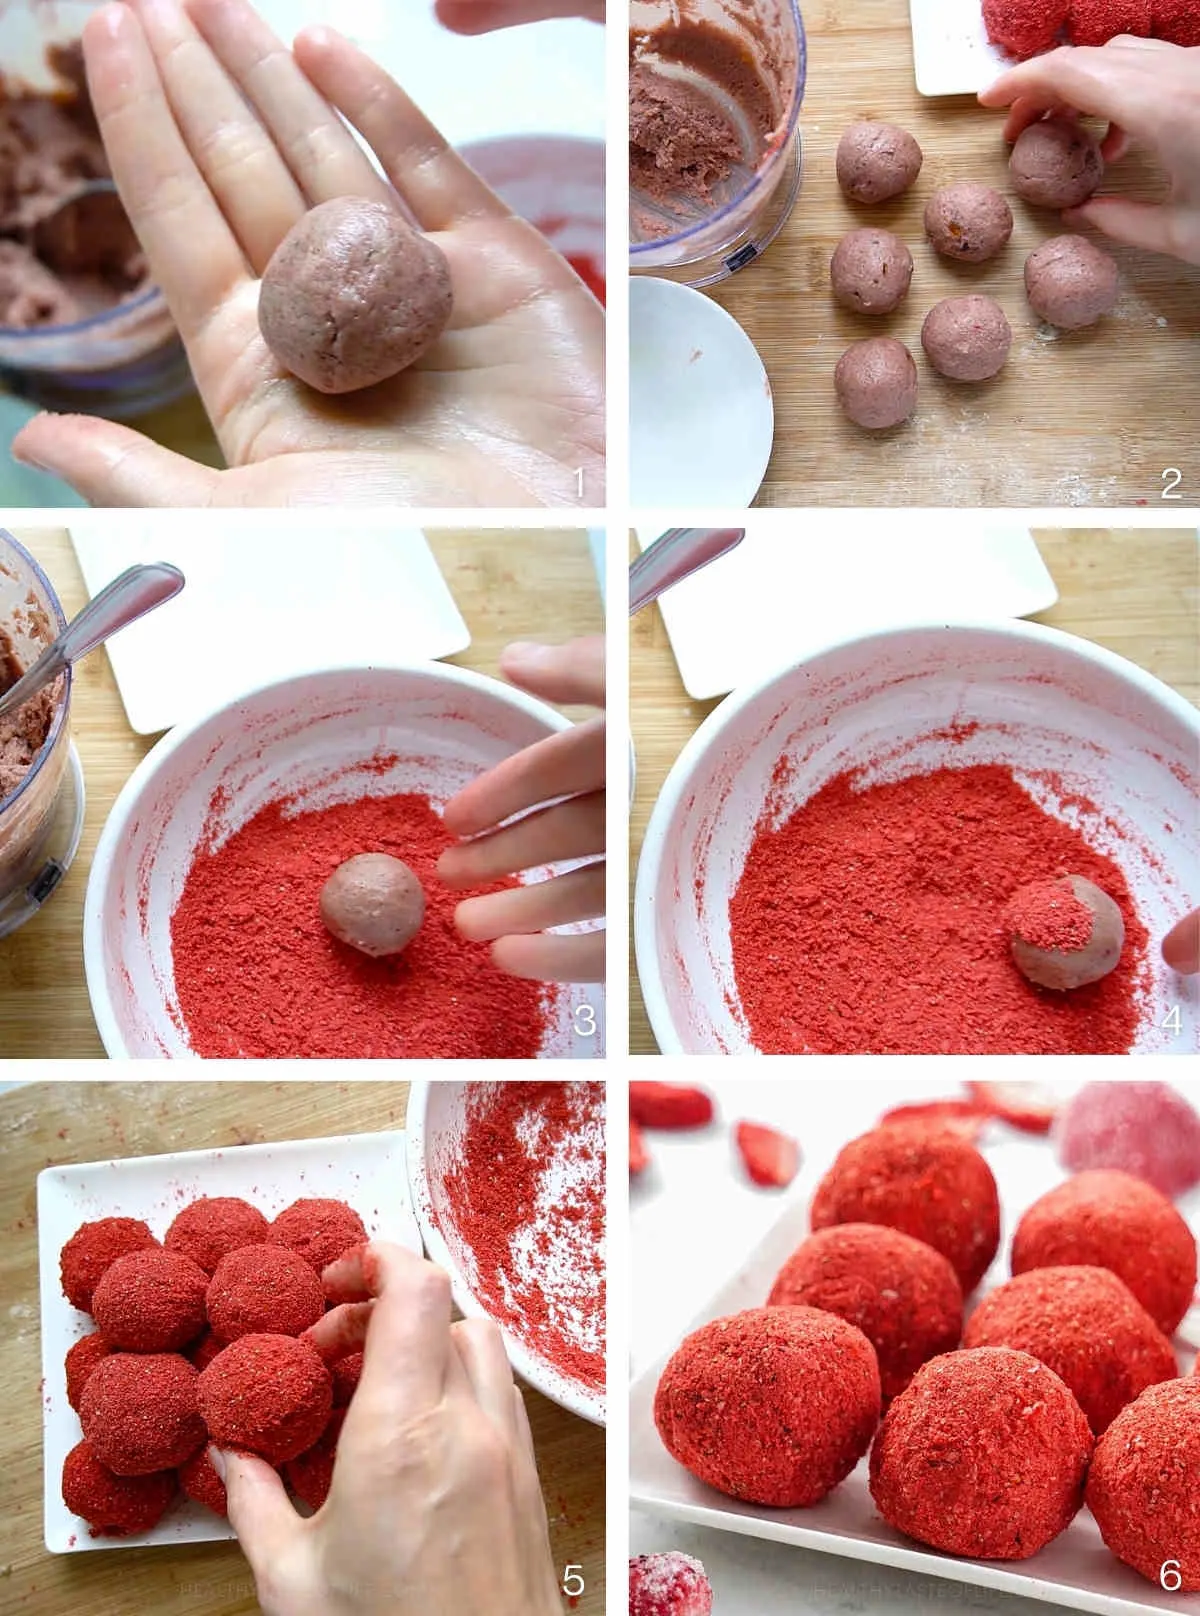 Process shots showing How to make strawberry bliss balls and coat with strawberry.